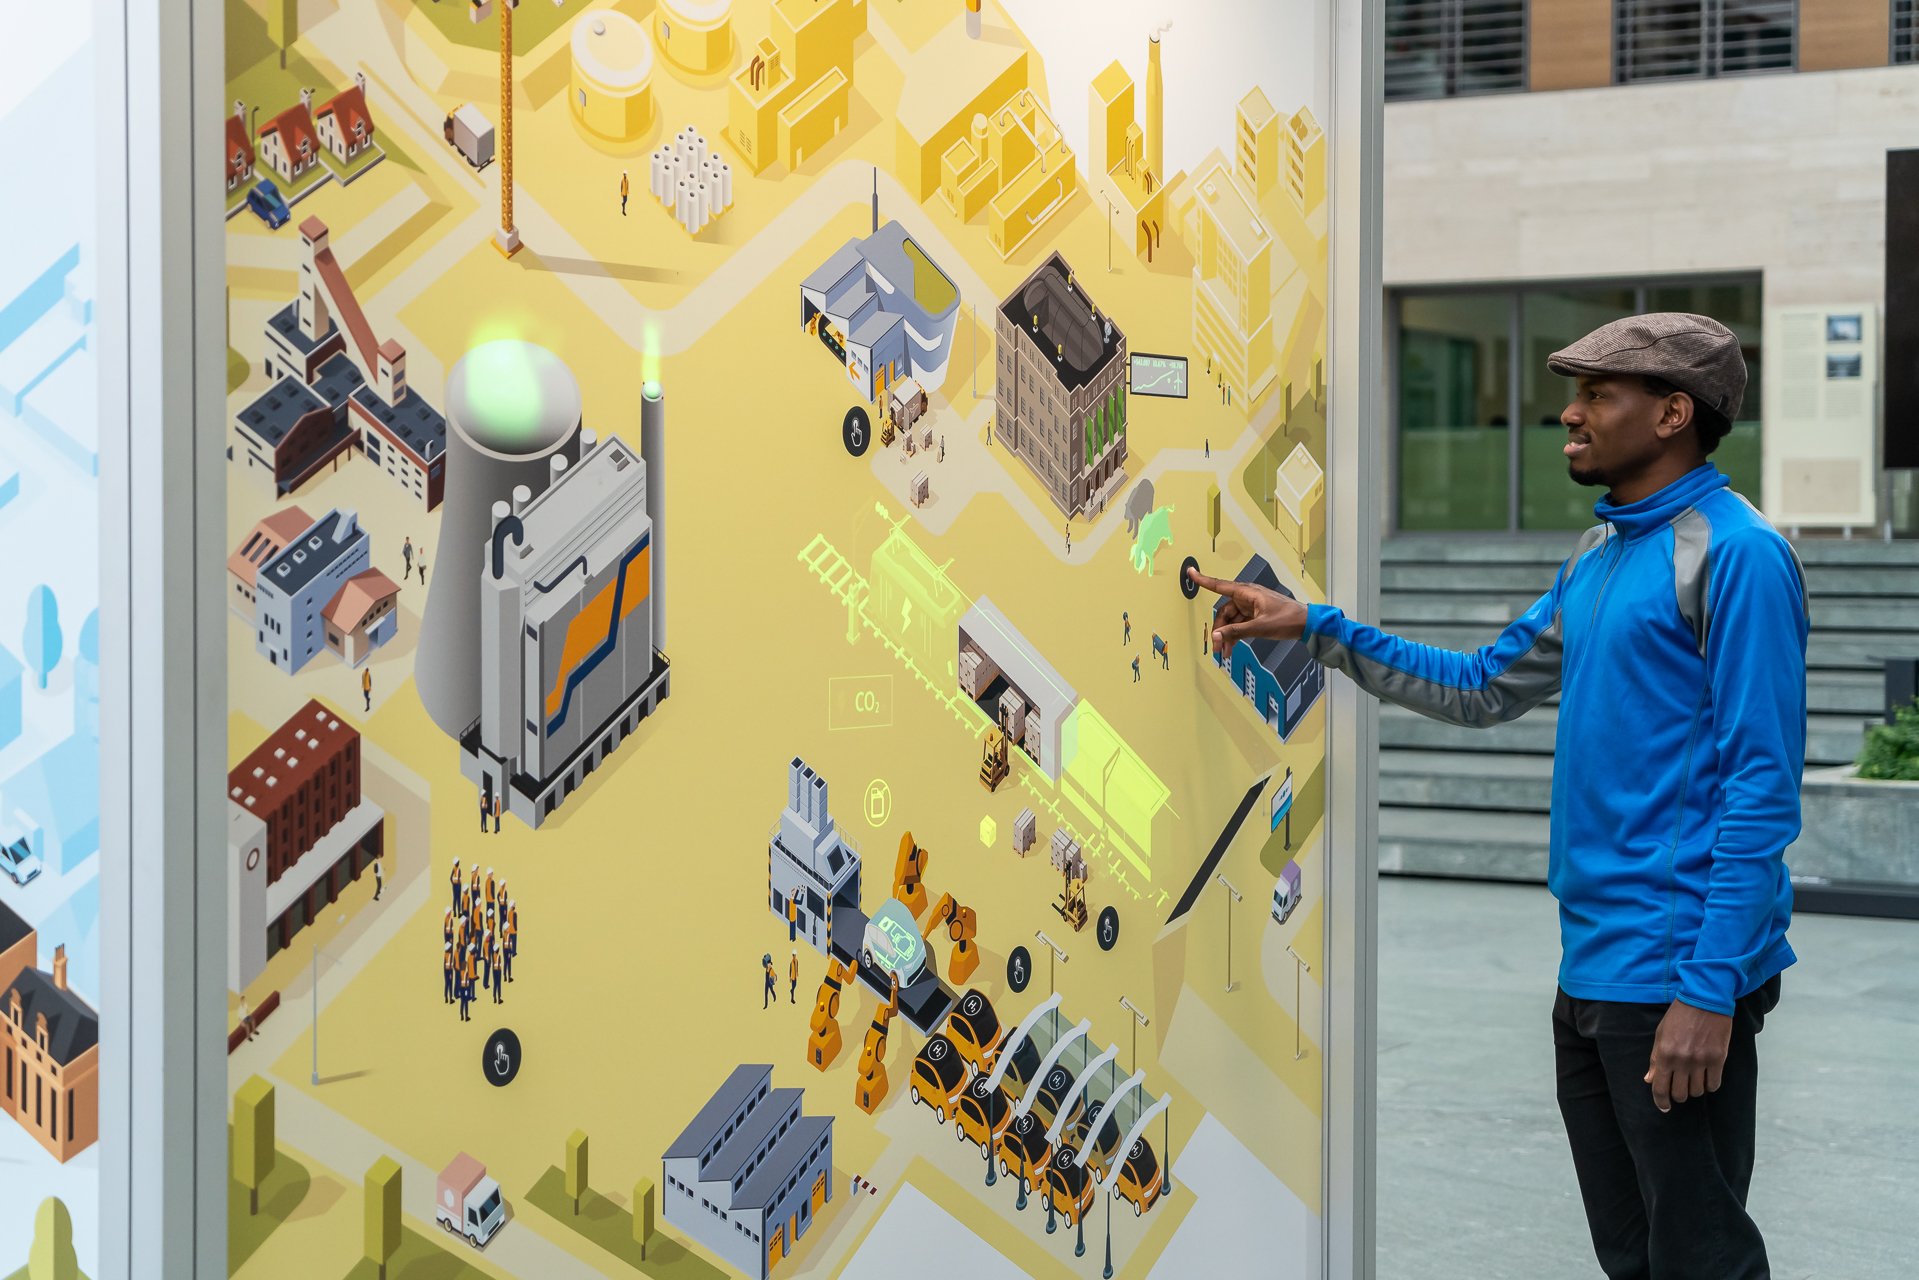 A visitor starts up the animation at the Energy in Transition station and is fascinated by the light-up display of a freight train powered by electricity and an electric car on a production line.